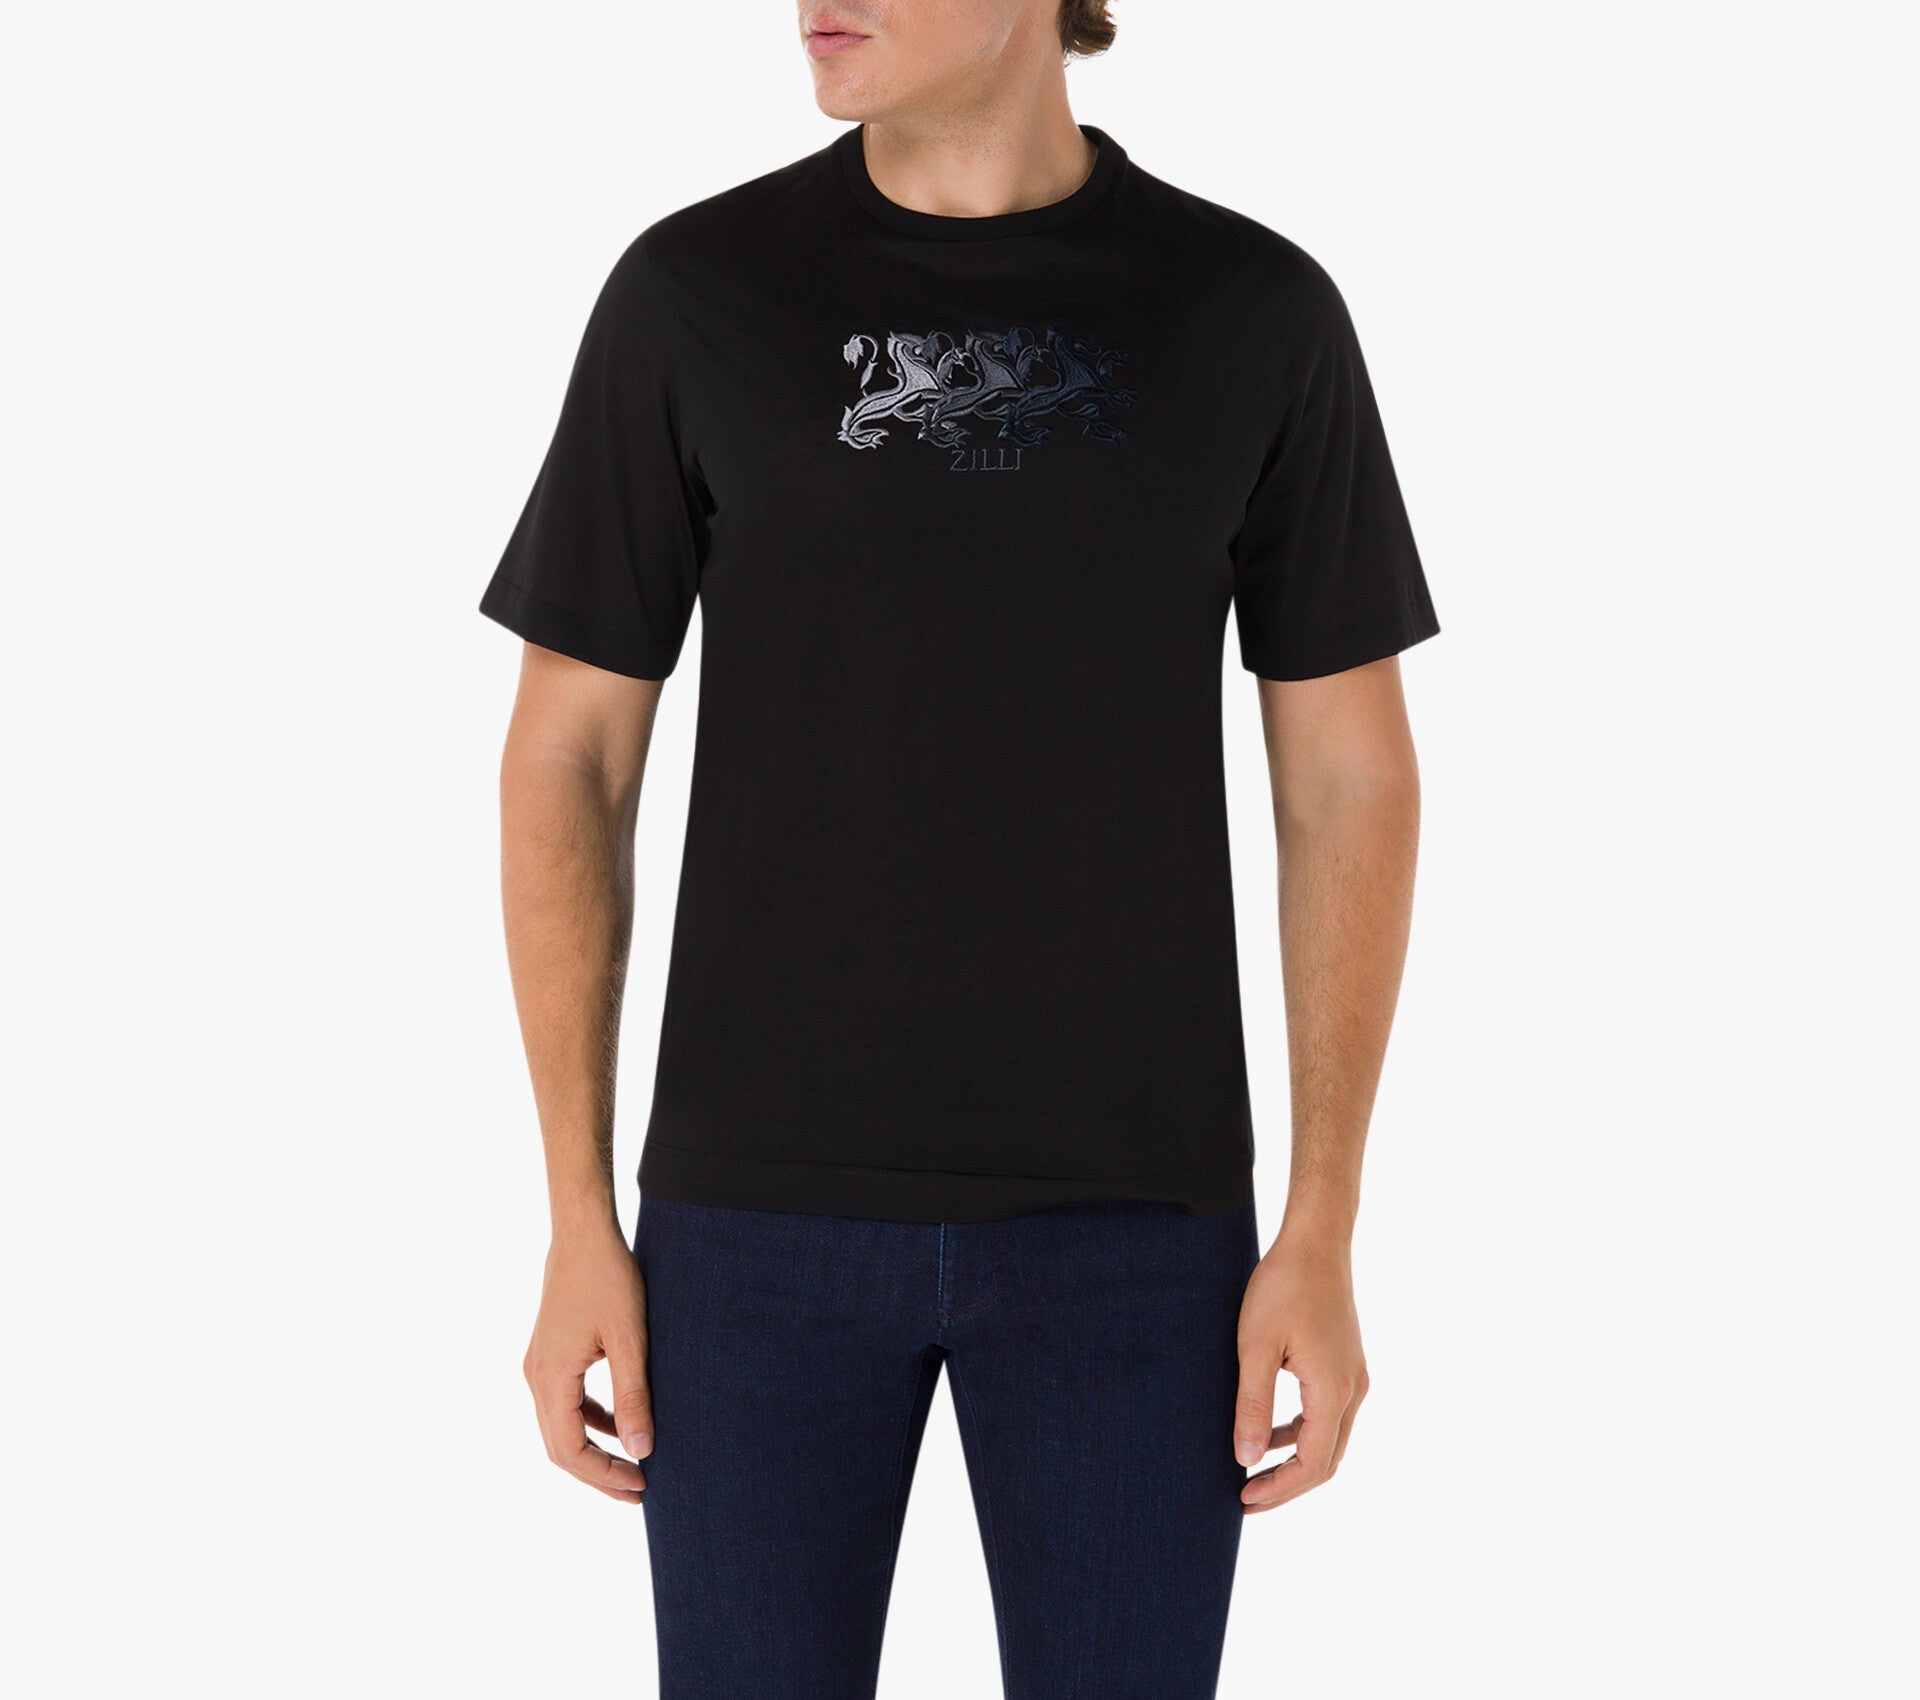 Zilli Black T-shirt with Triple Griffon Embroidery